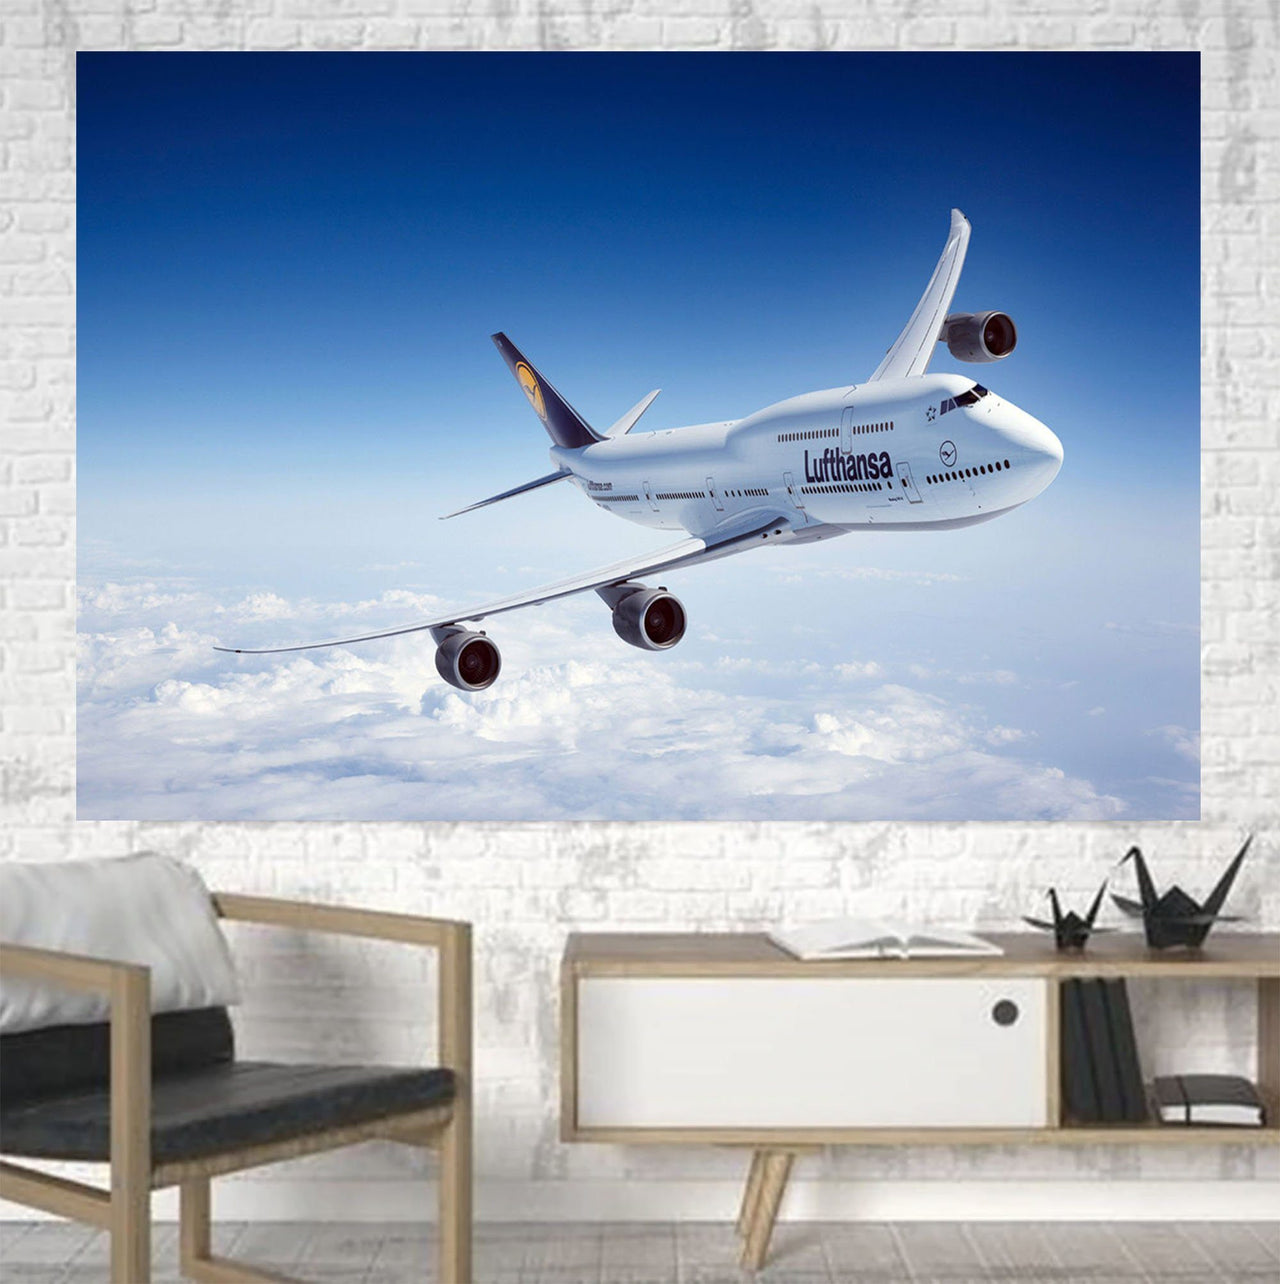 Cruising Lufthansa's Boeing 747 Printed Printed Canvas Posters (1 Piece) Aviation Shop 